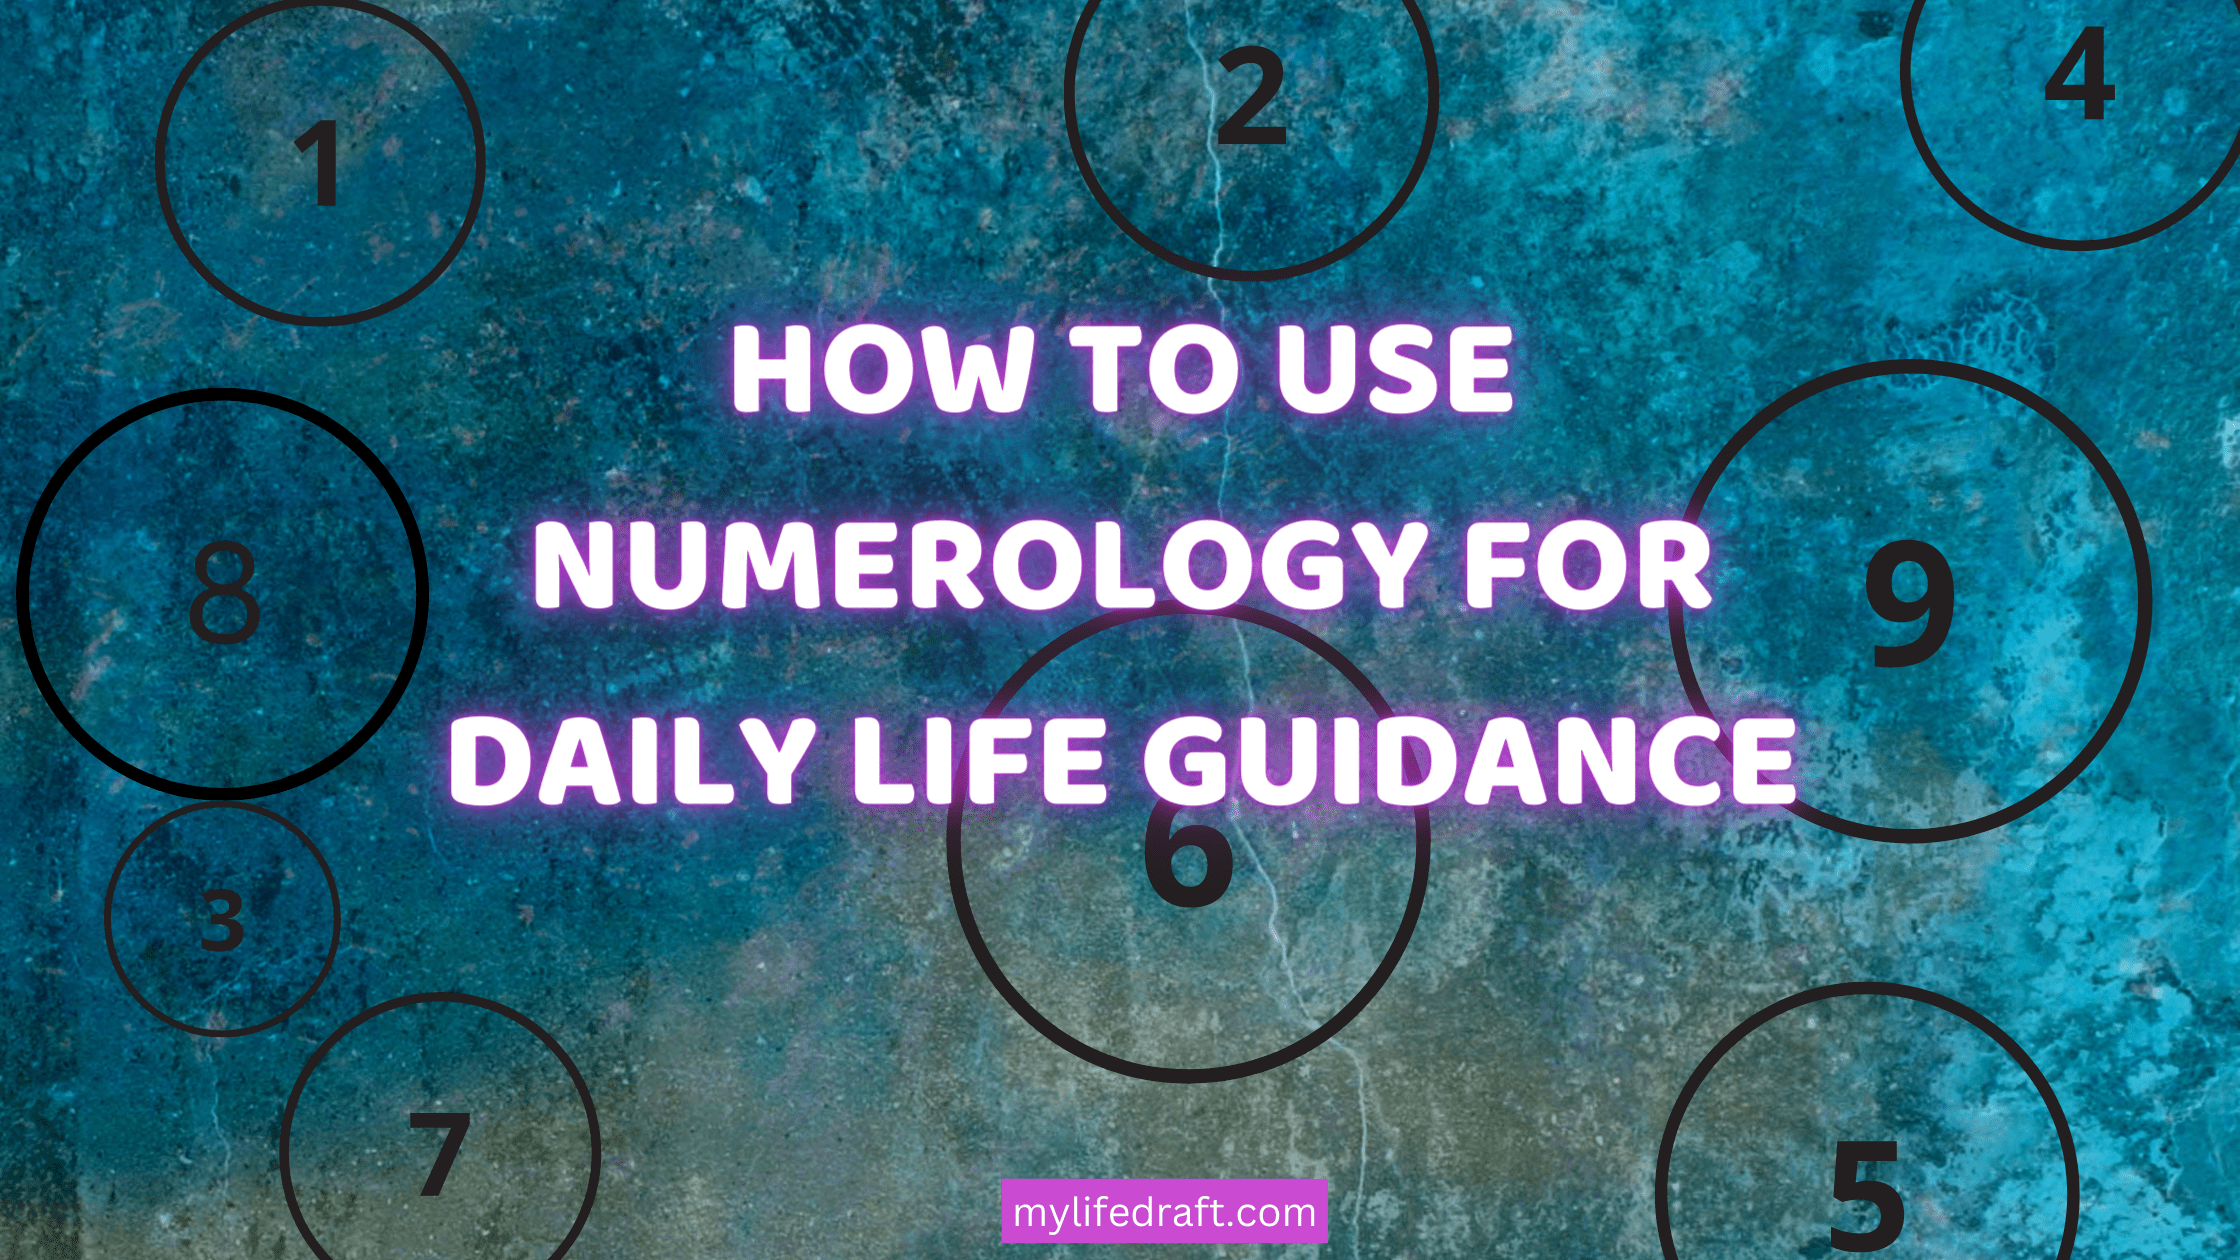 How to Use Numerology for Daily Life Guidance